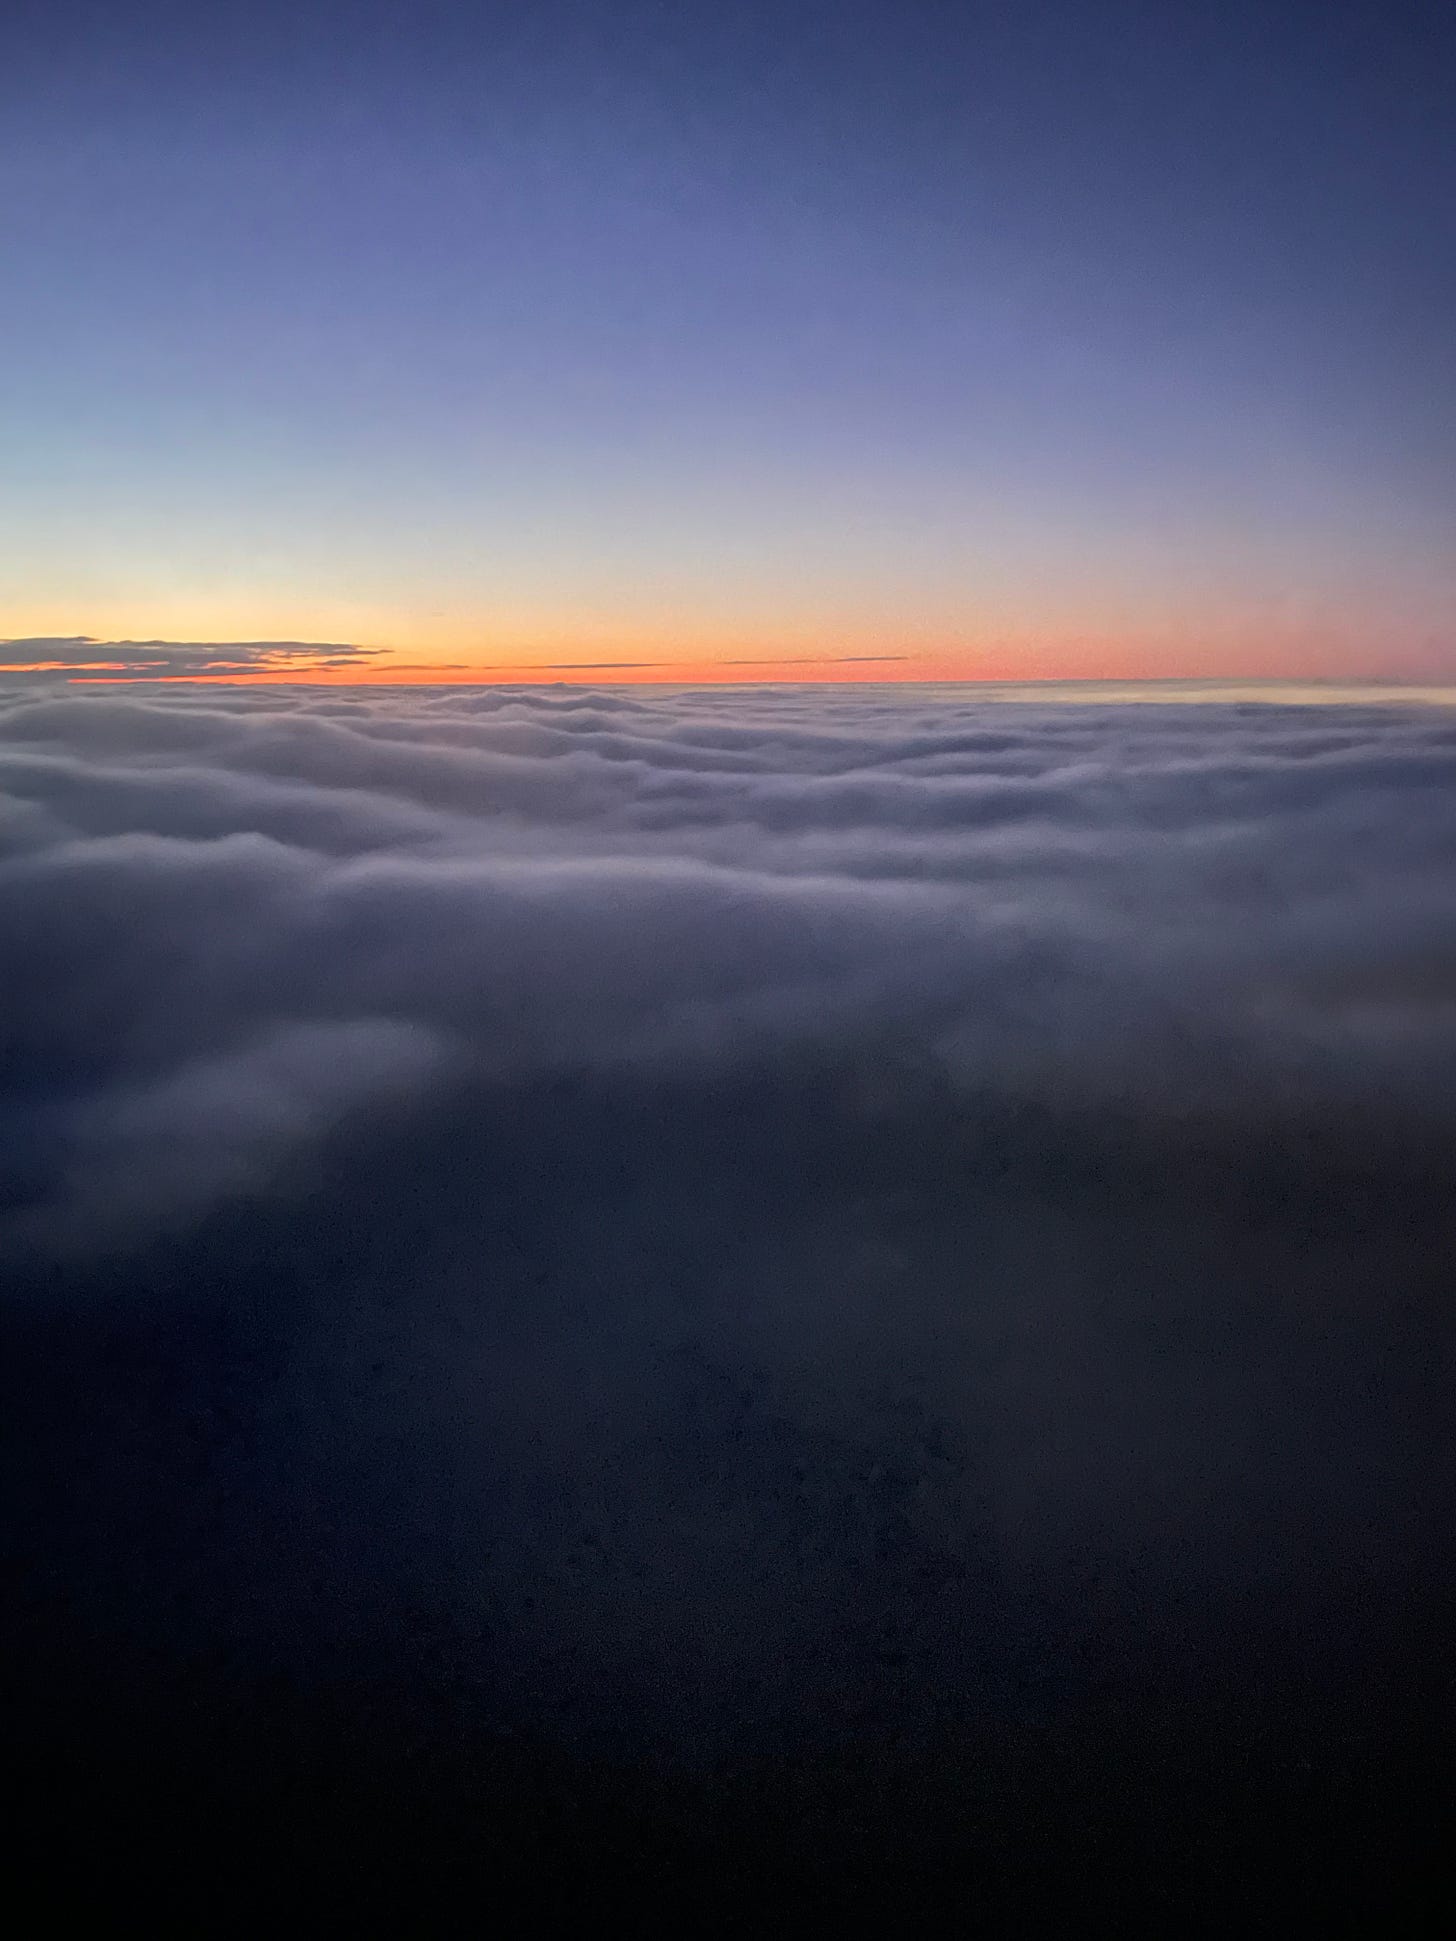 Above the clouds, the dawn chases the darkness. Bright orange begins to fill the horizon, creating a orangish-dark blue gradient above the clouds.